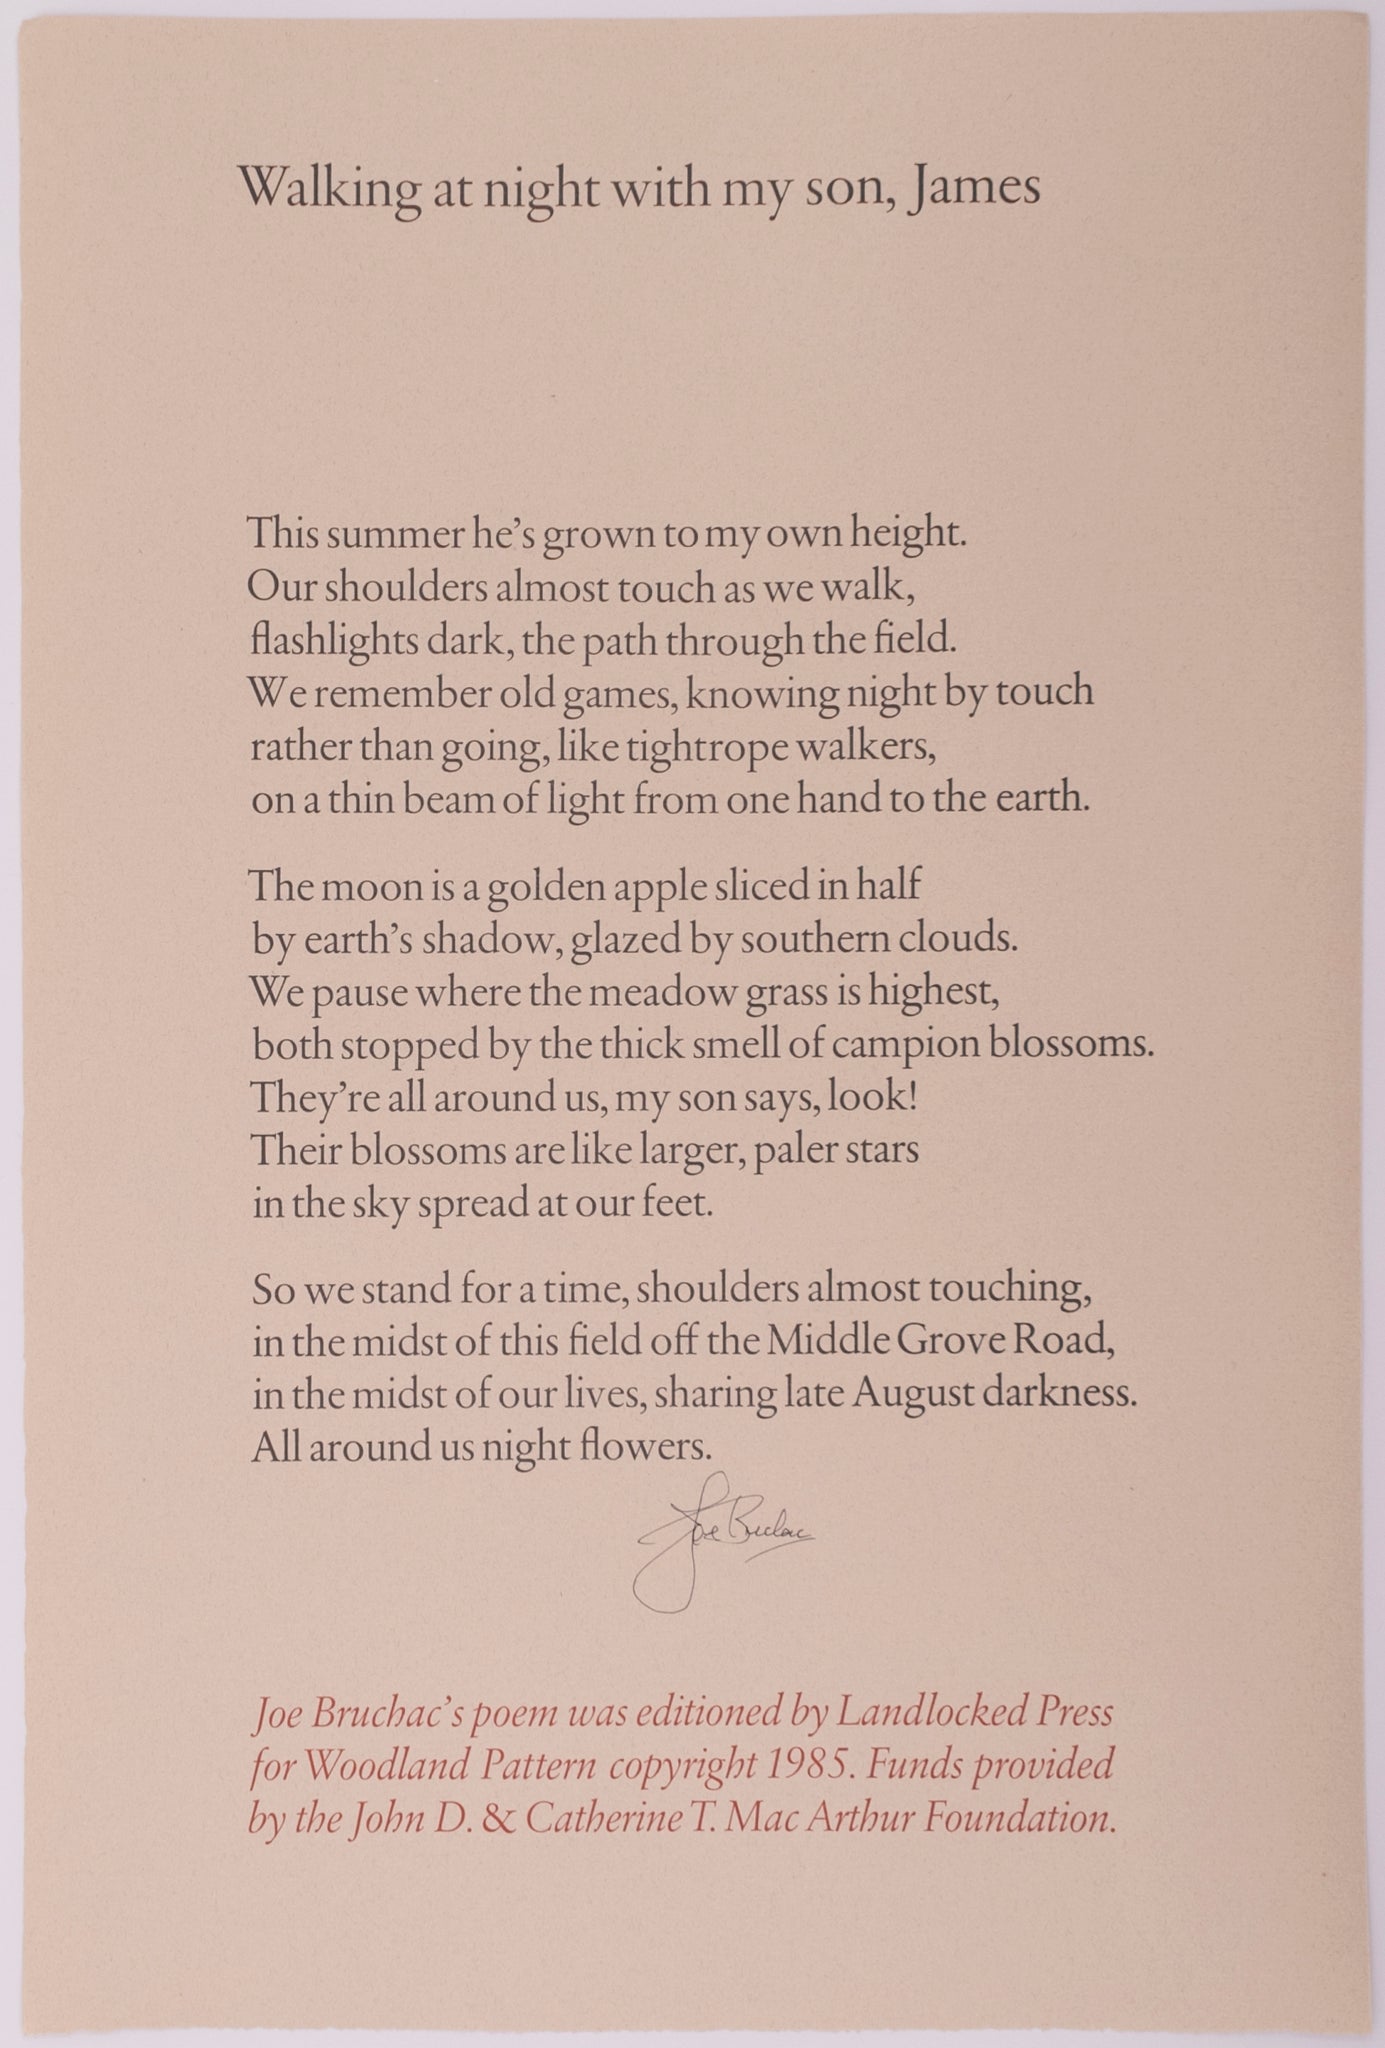 Broadside called Walking at night with my son, James by Joe Bruchac in black text on grey paper 